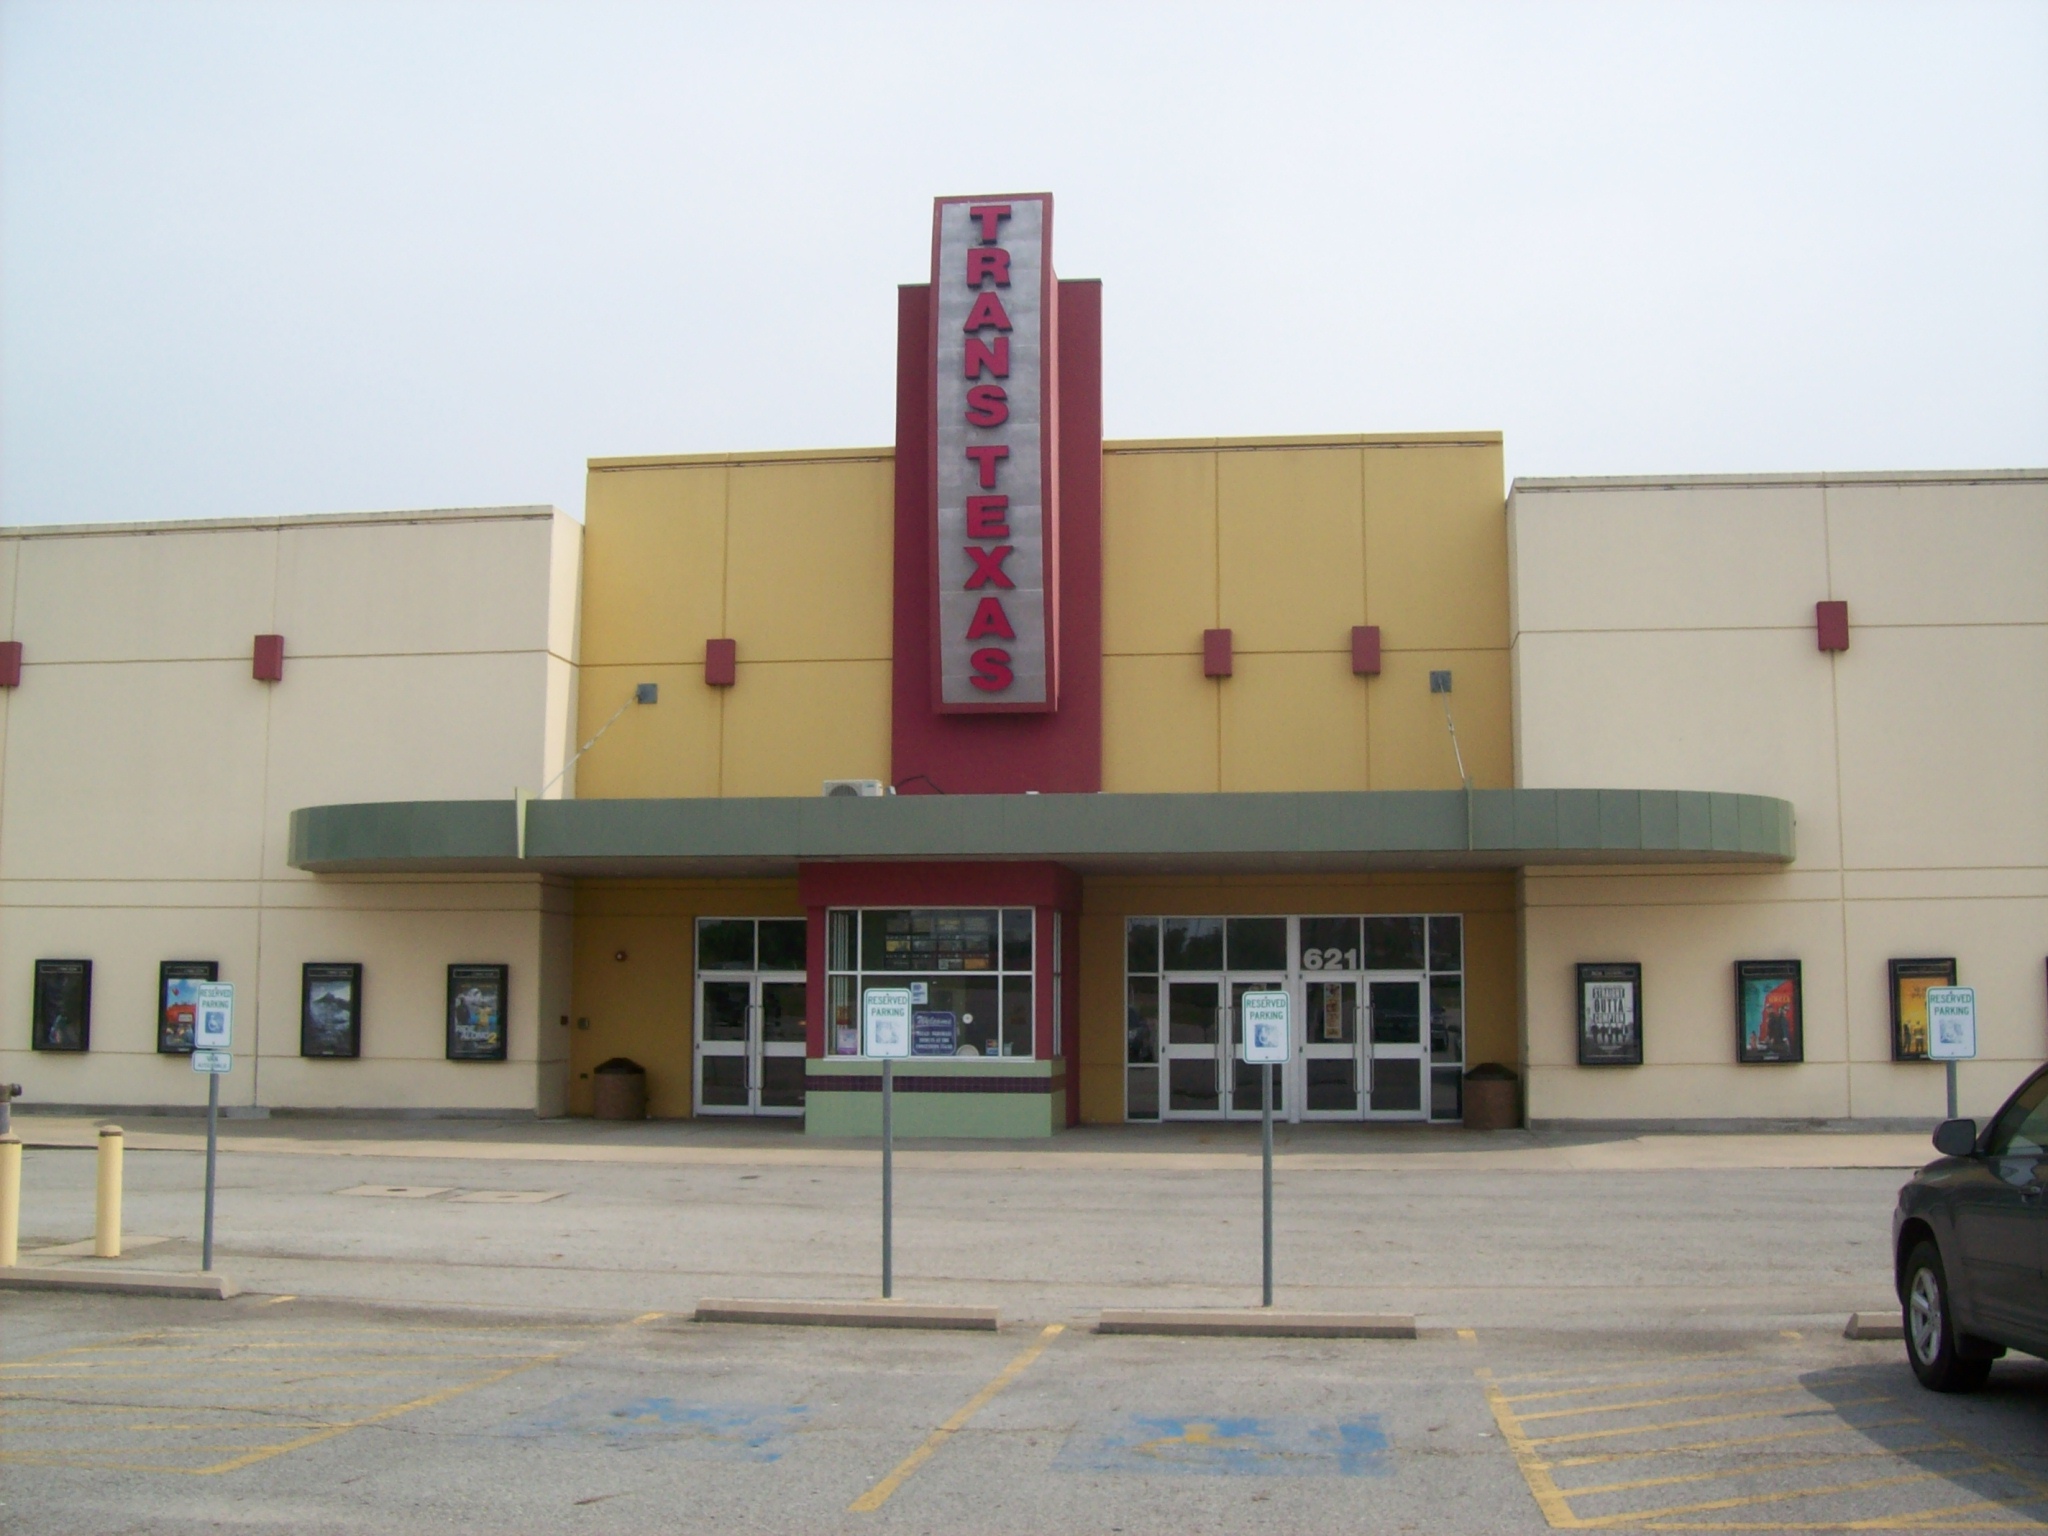 Bright Star Cinemas to open as deluxe theater | The Sulphur Springs